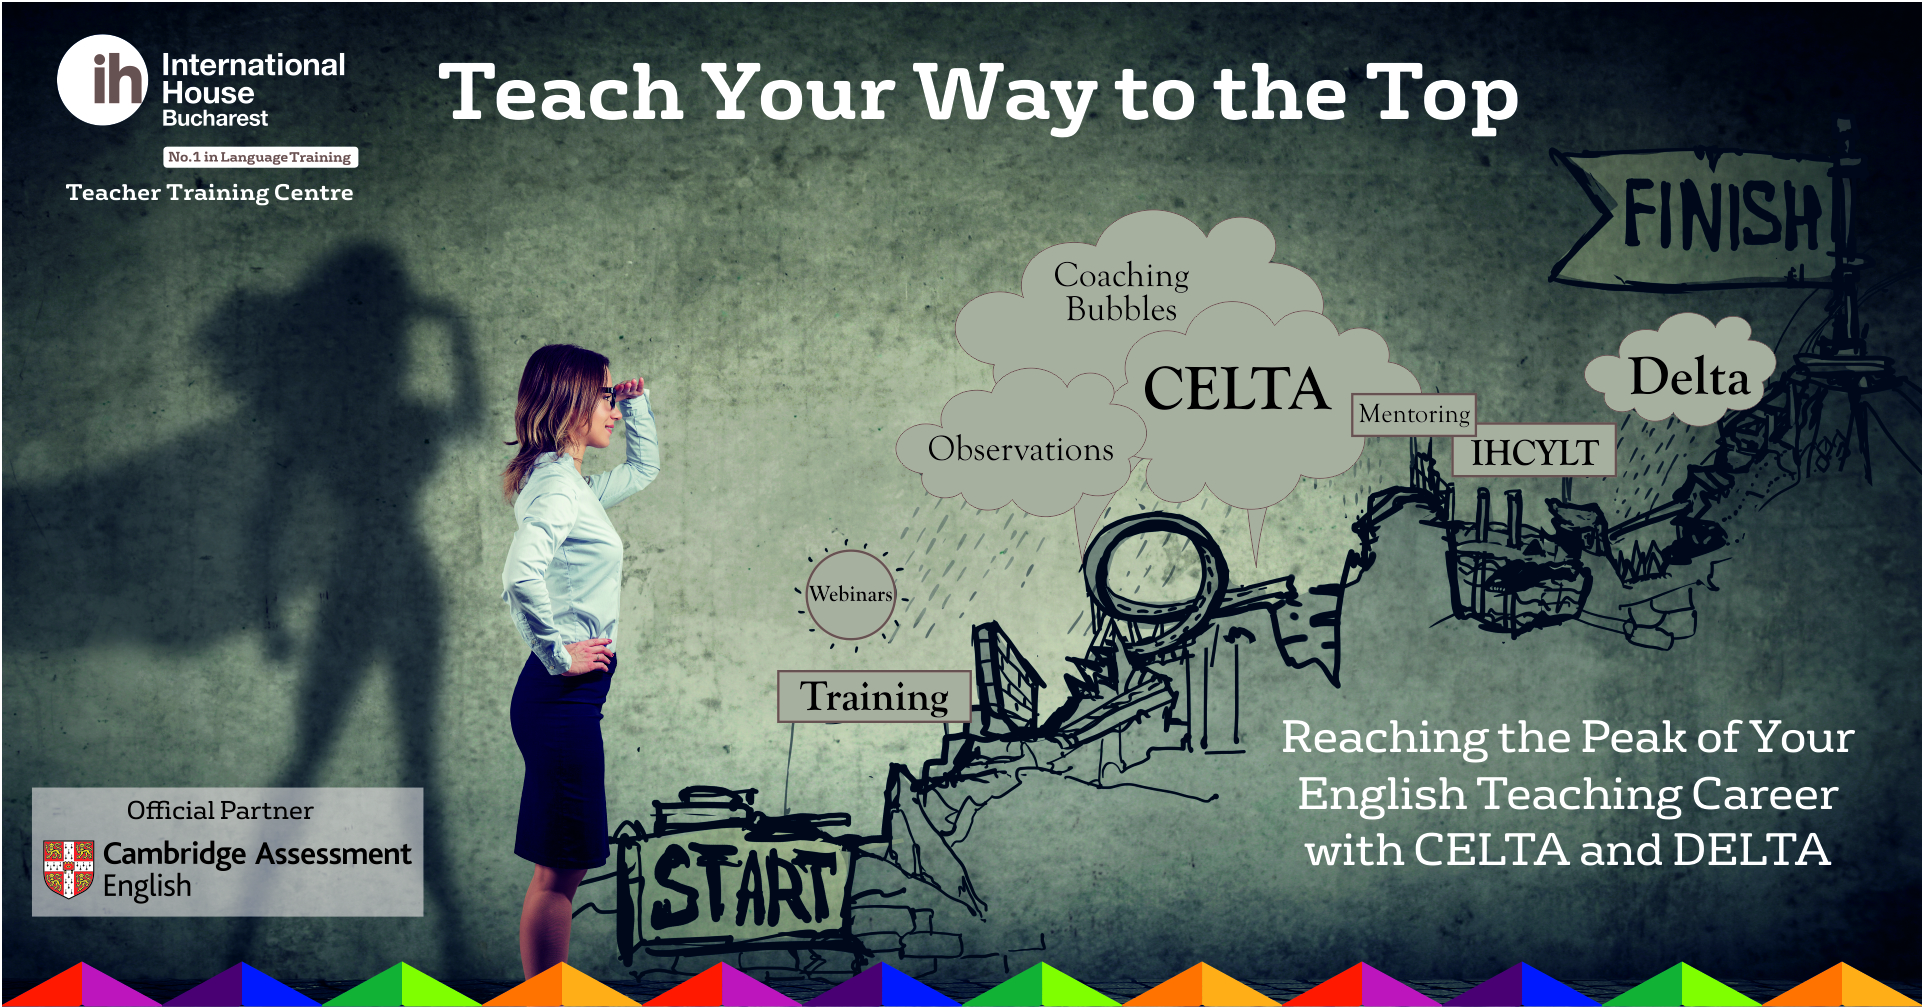 Reaching the Peak of Your English Teaching Career with CELTA and DELTA